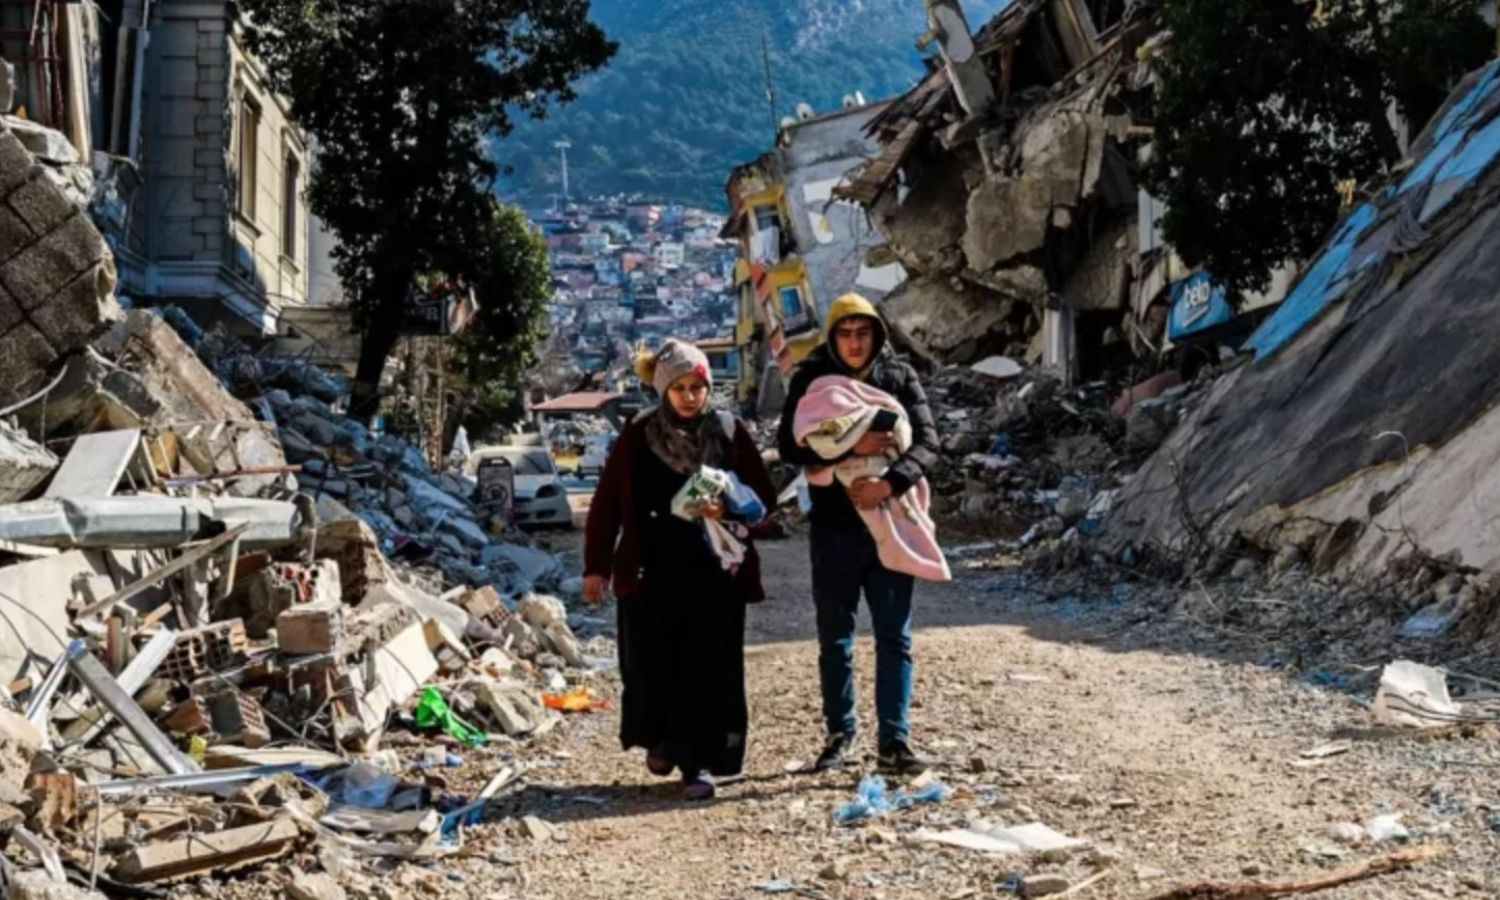 A woman and a man walk through the earthquake ruins in Hatay state, southern Turkey - February 12, 2023 - (Getty Images)